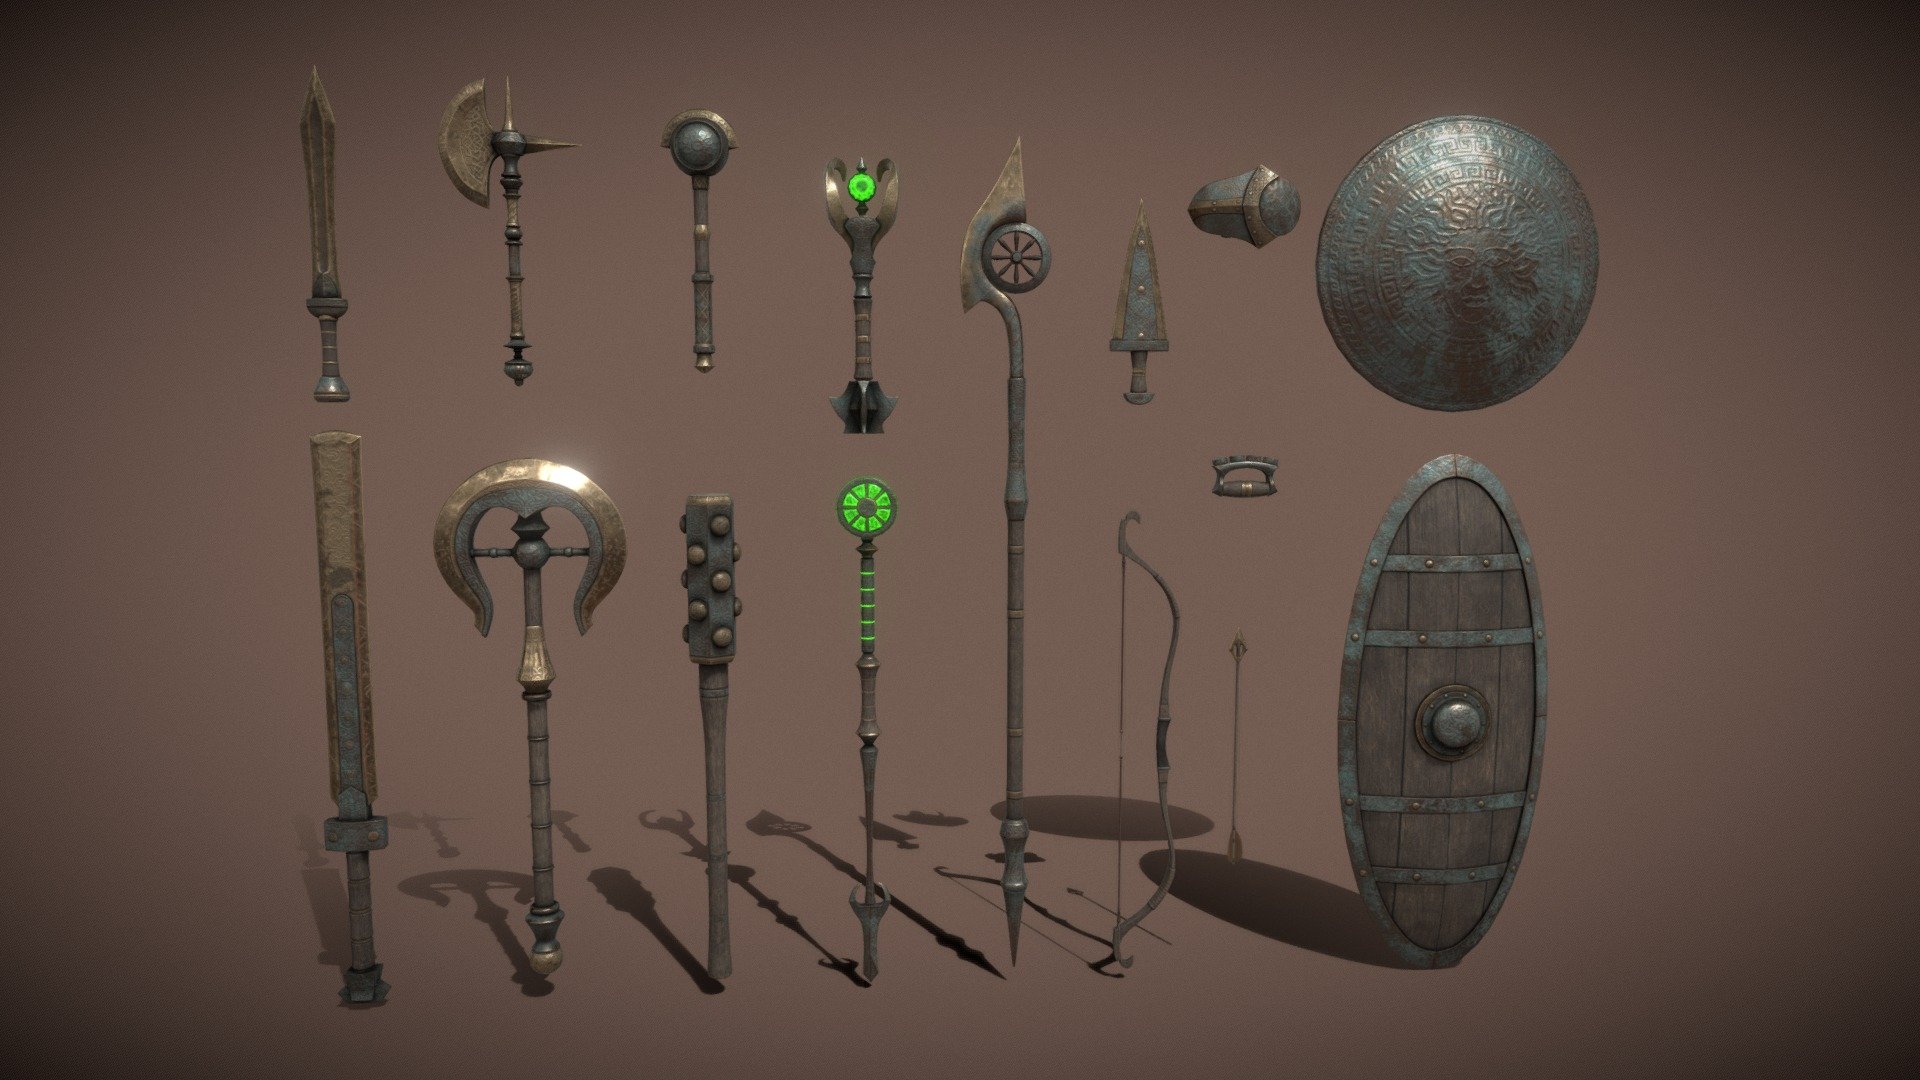 A set of fantasy Bronze weapons.

The set consists of sixteen unique objects.

PBR textures have a resolution of 2048x2048.

Total polygons: 38516 triangles; 19651 vertices.

1) Sword (one-handed) - 1748 tris
2) Sword (two-handed) - 1648 tris
3) Mace (one-handed) - 1644 tris
4) Mace (two-handed) - 2688 tris
5) Ax (one-handed) - 3390 tris
6) Ax (two-handed) - 3564 tris
7) Lance - 3058 tris
8) Dagger - 1200 tris
9) Brass knuckles - 1516 tris
10) Bow - 3092 tris
11) Staff - 2616 tris
12) Scepter - 3110 tris
13) Shield (small) - 2298 tris
14) Shield (medium) - 2456 tris
15) Shield (great) - 3716 tris
16) Arrow - 772 tris

Archives with textures contain:

PNG textures for blender - base color, metallic, normal, roughness, opacity, glow

Texturing Unity (Metallic Smoothness) - AlbedoTransparency, MetallicSmoothness, Normal, Emission

Texturing Unreal Engine - BaseColor, Normal, OcclusionRoughnessMetallic, Emissive - Bronze weapons fantasy set - 3D model by zilbeerman 3d model